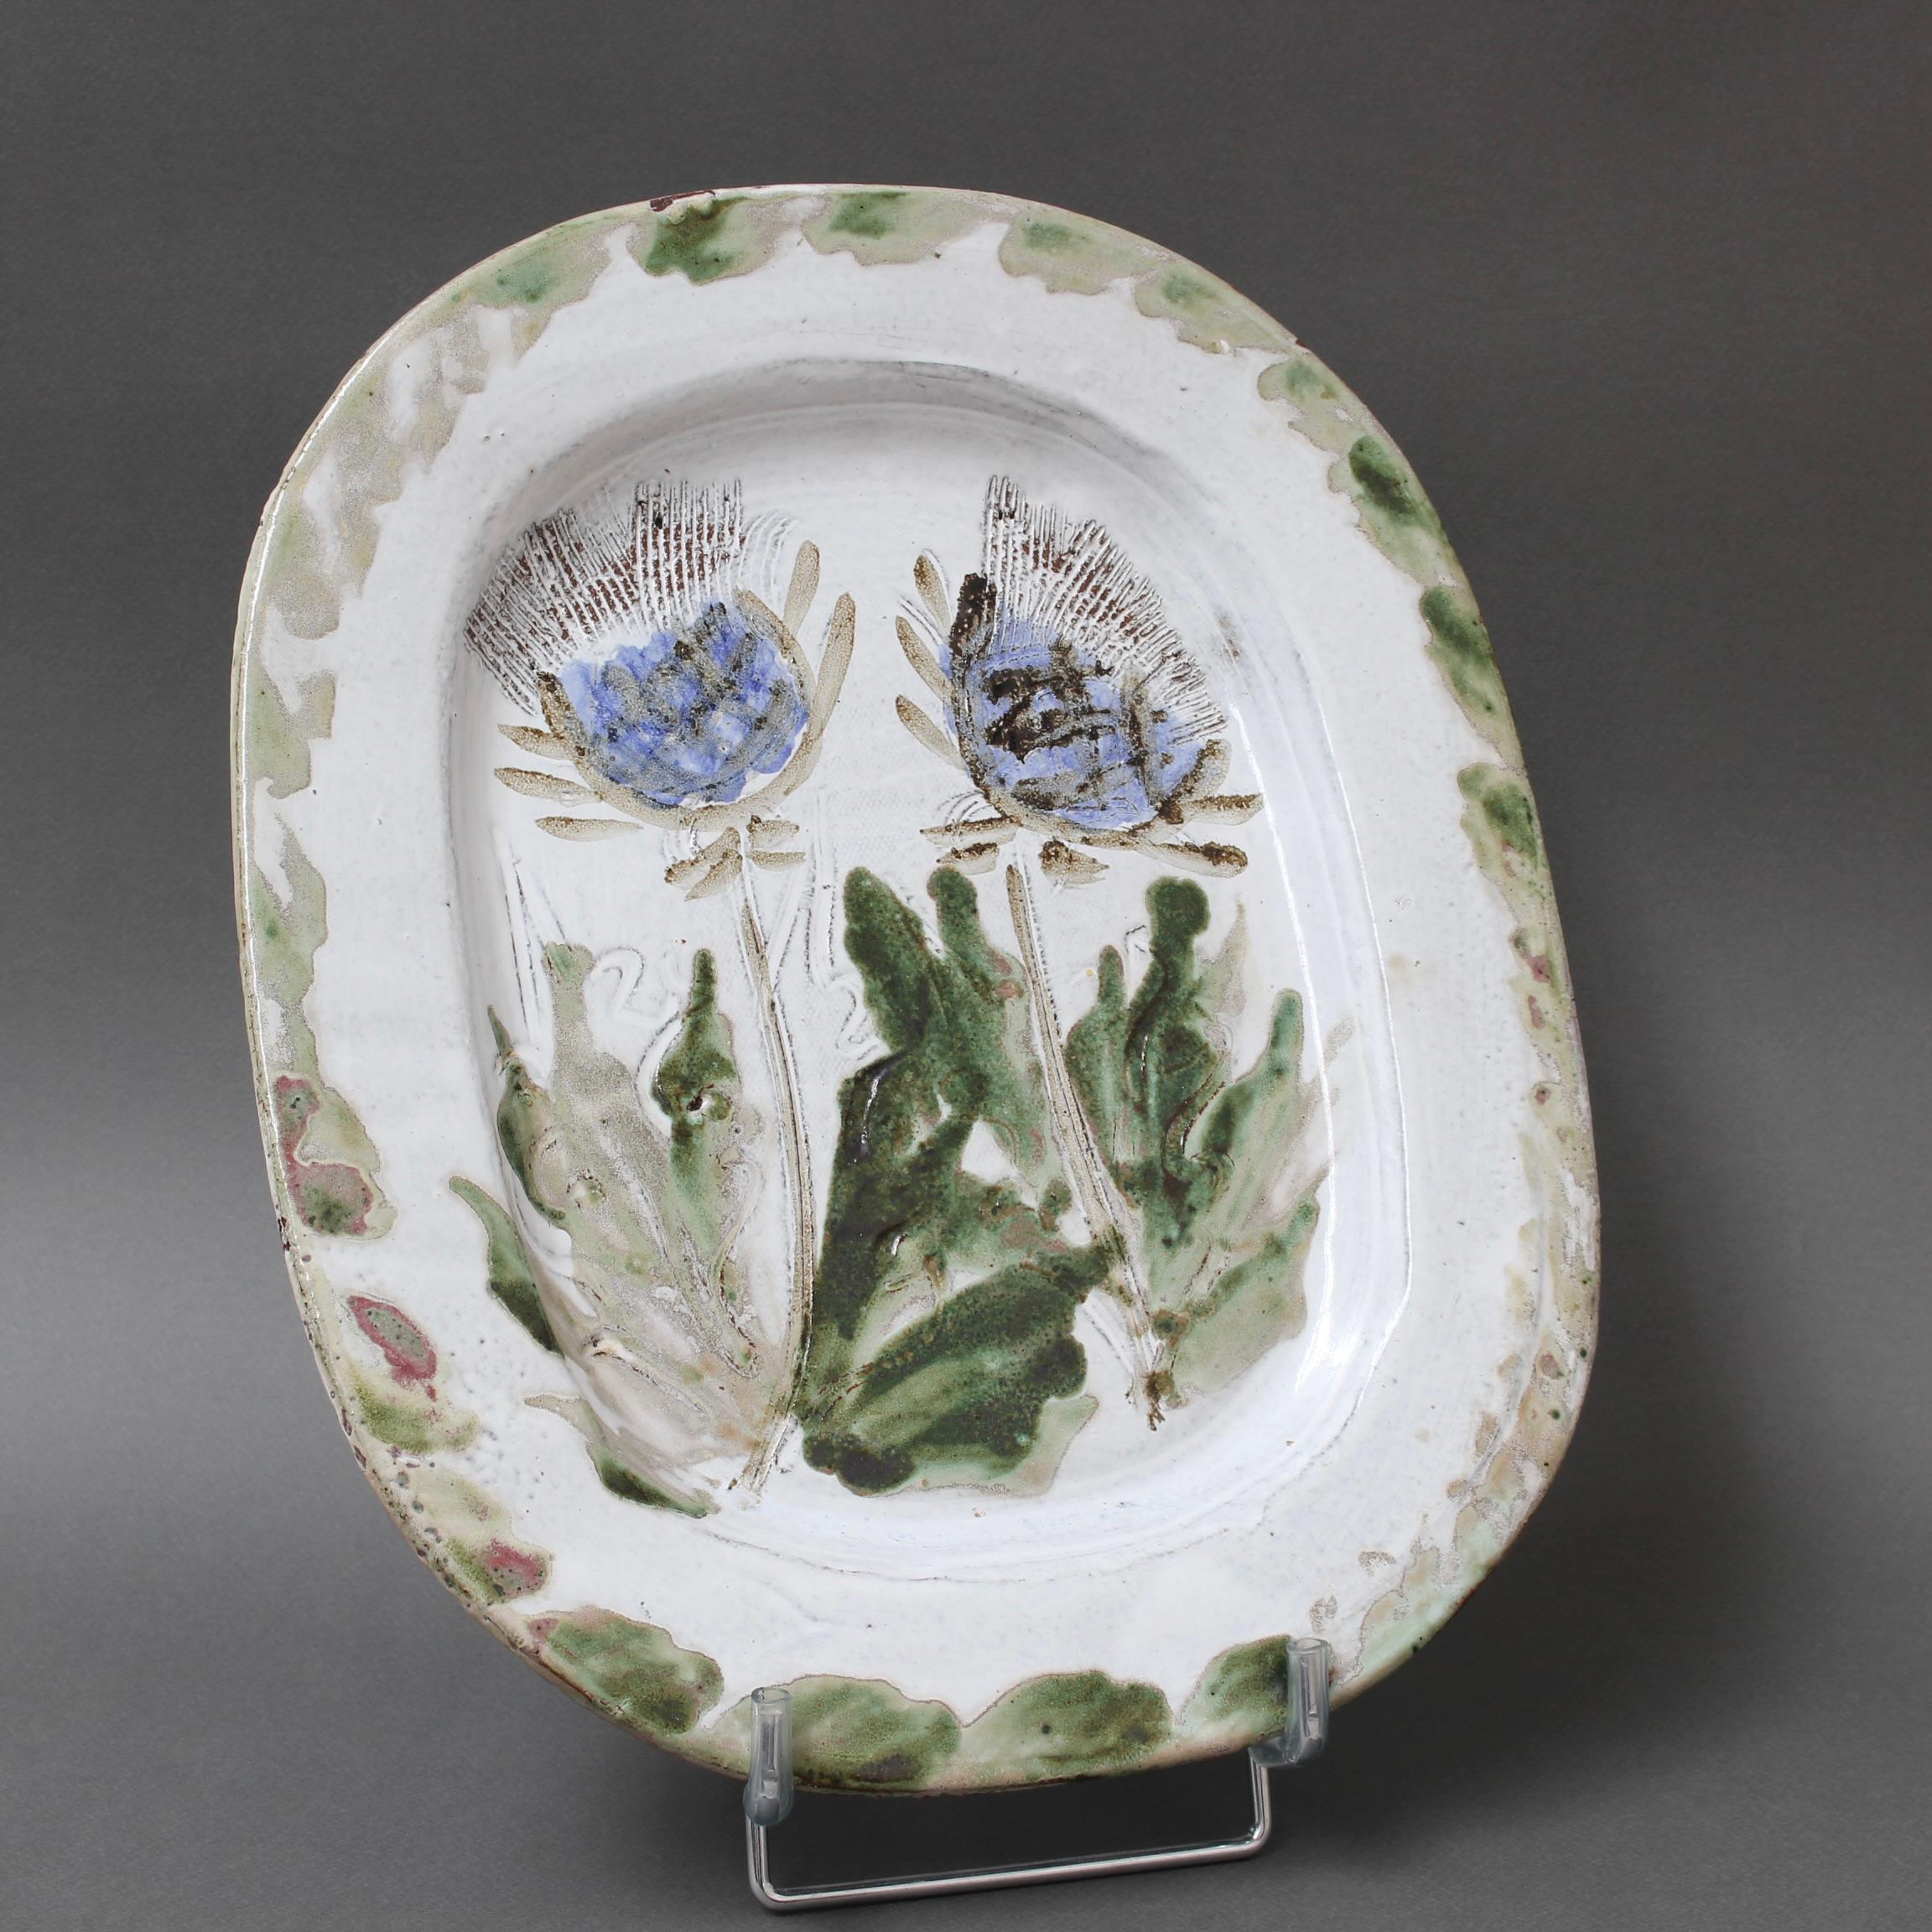 Midcentury decorative platter (circa 1970s) by Albert Thiry. A creamy-white glaze with touches of blue-grey provides the background for a colourful thistle motif in the centre recess. The rim assumes the colour of the flowers' foliage, some parts